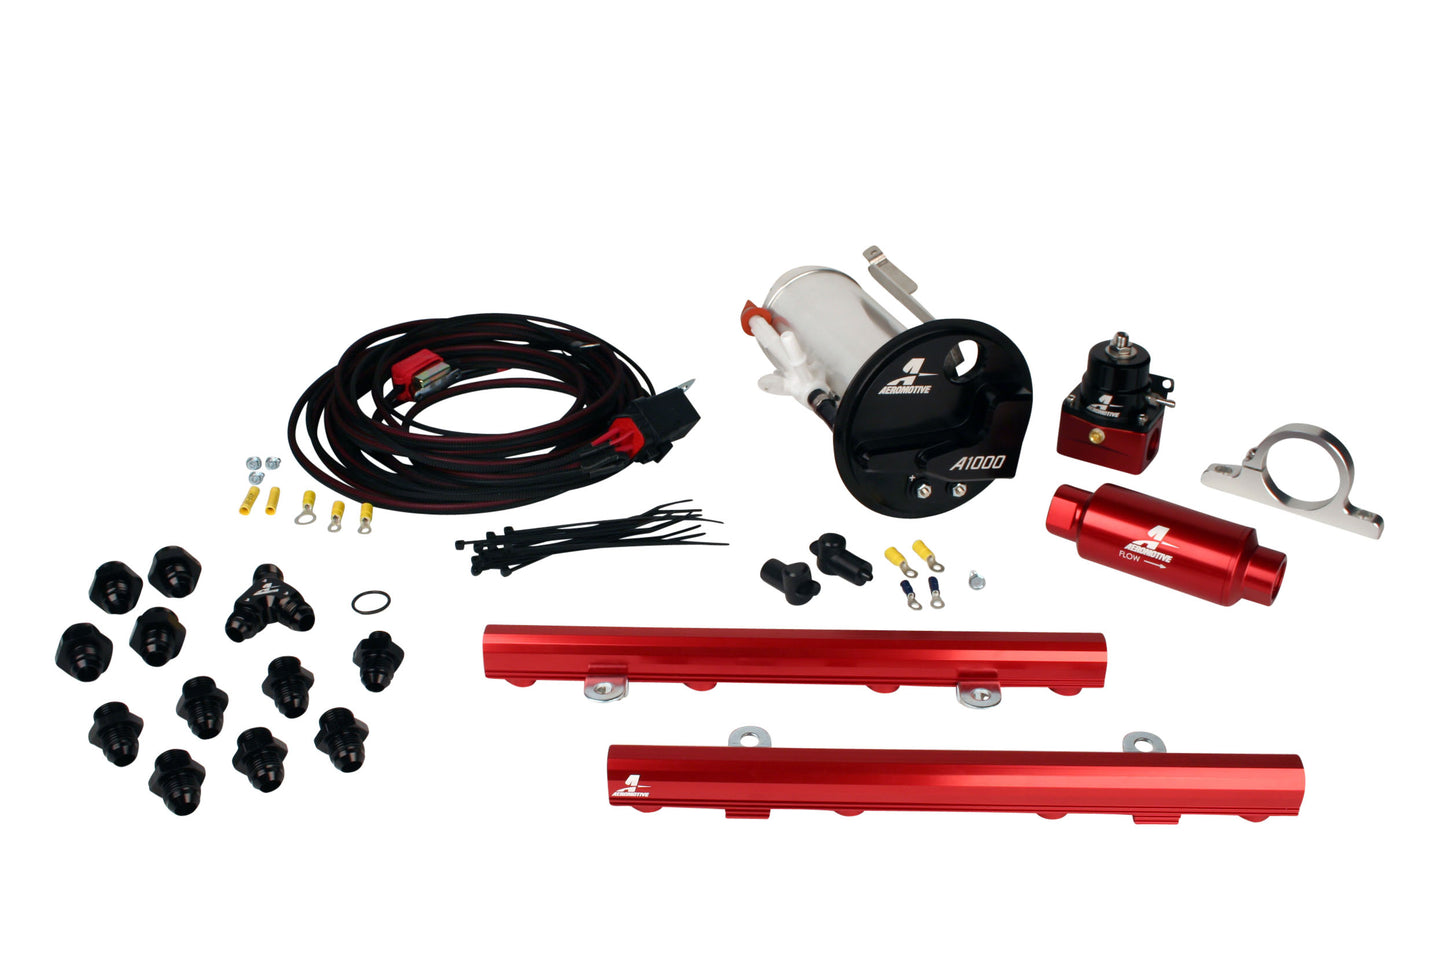 07-12 Shelby GT500 Stealth A1000 Racing Fuel System with 5.0L 4-V Fuel Rails